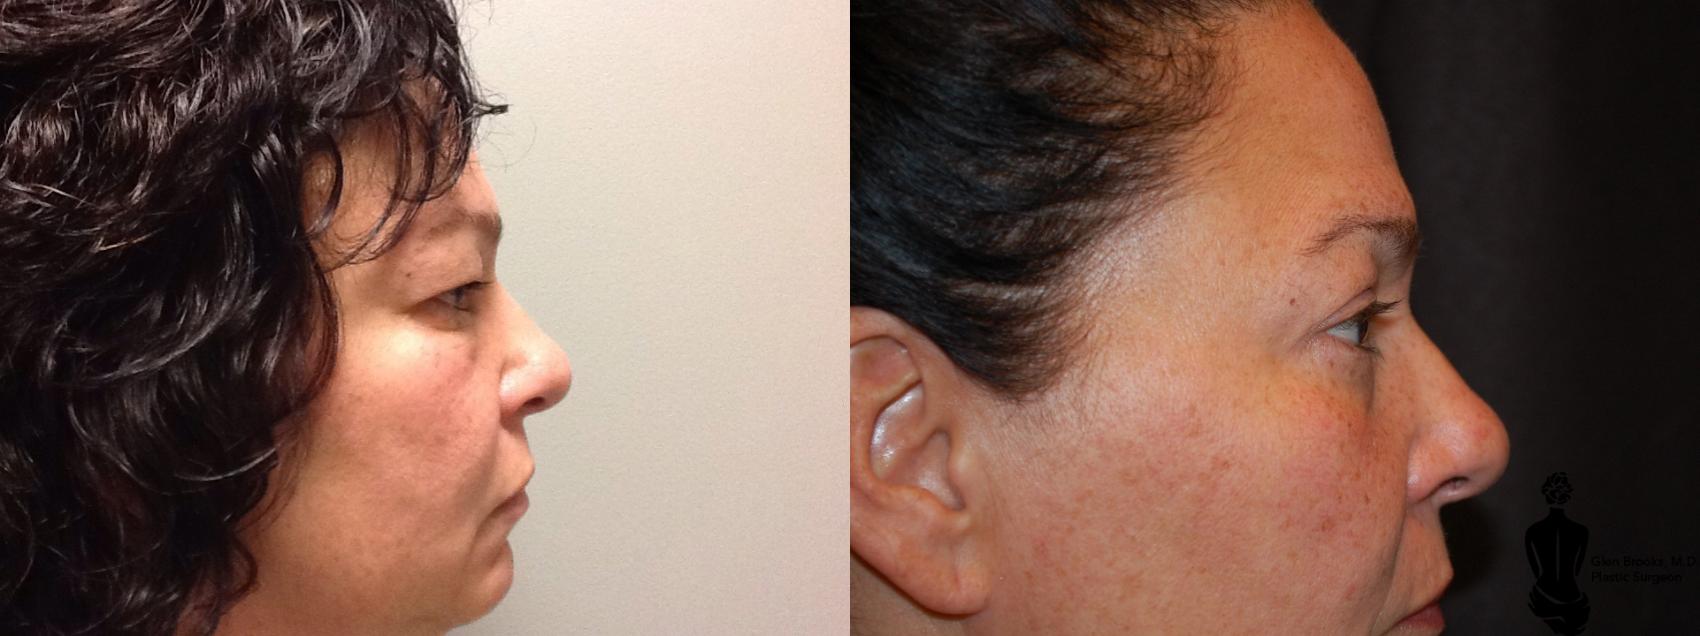 Blepharoplasty Before & After Photo | Springfield, MA | Aesthetic Plastic & Reconstructive Surgery